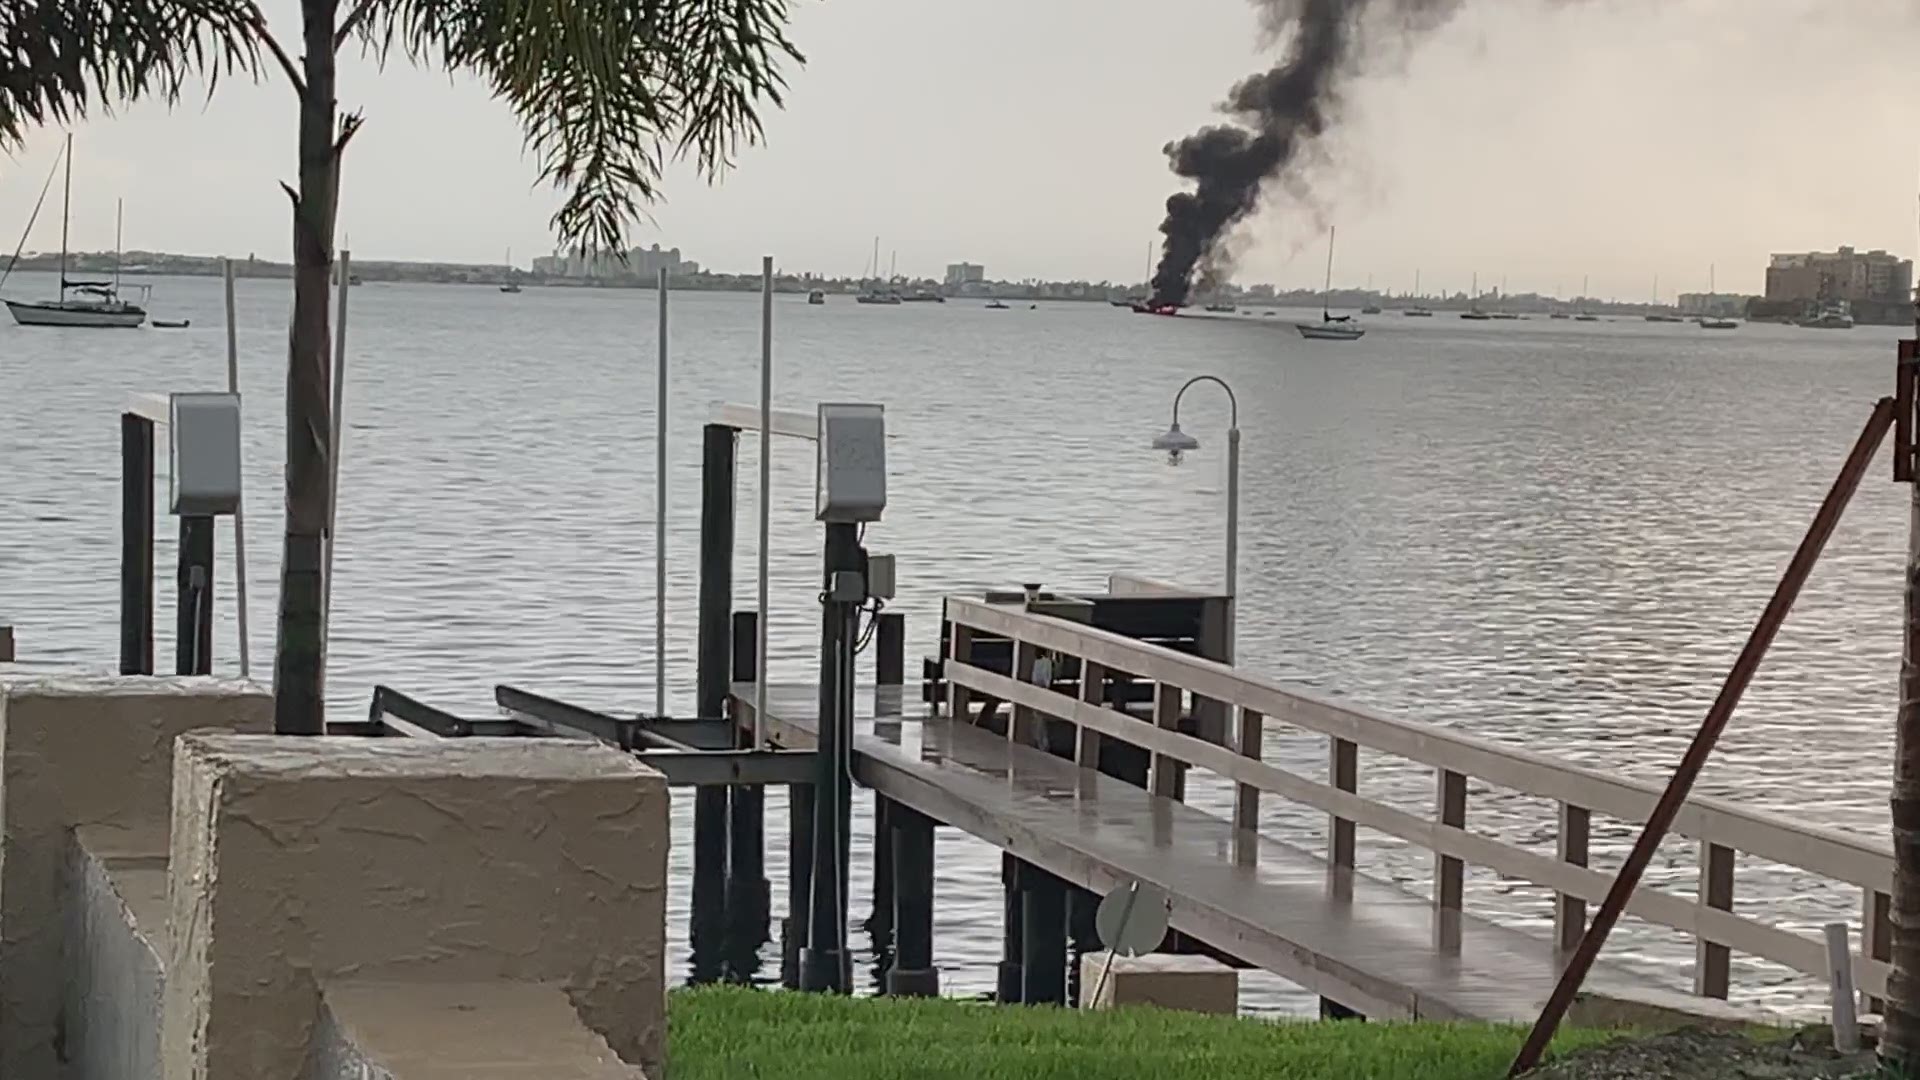 Severe weather made its way across Tampa Bay Saturday. Video shows a boat at Boca Ciega Bay in  Gulfport and the boat starting on fire after witness say lightning struck it.